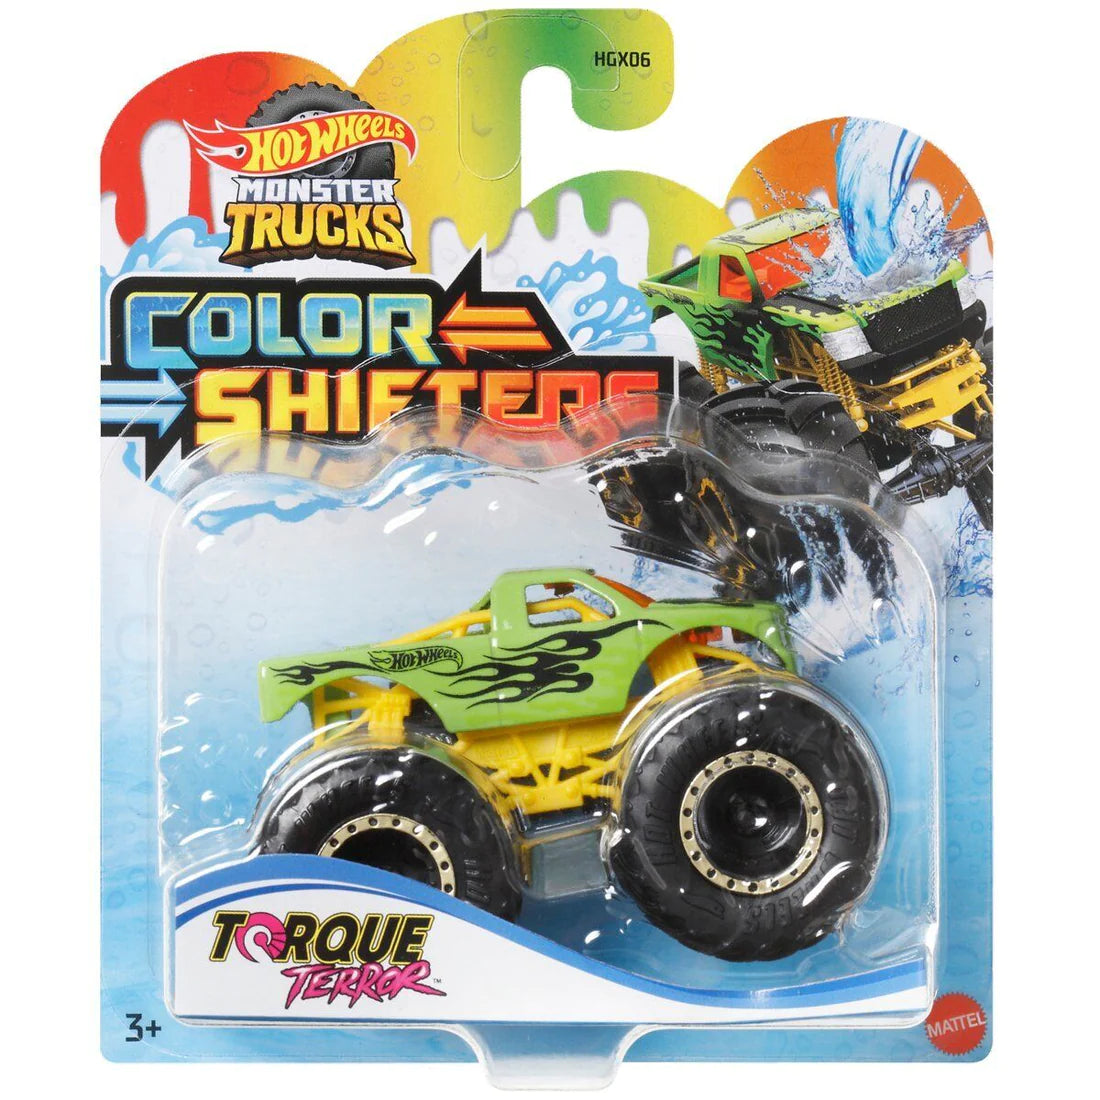 Hot Wheels Monster Trucks Color/Colour Shifters 1:64 New Sealed select the best - TORQUE TERROR